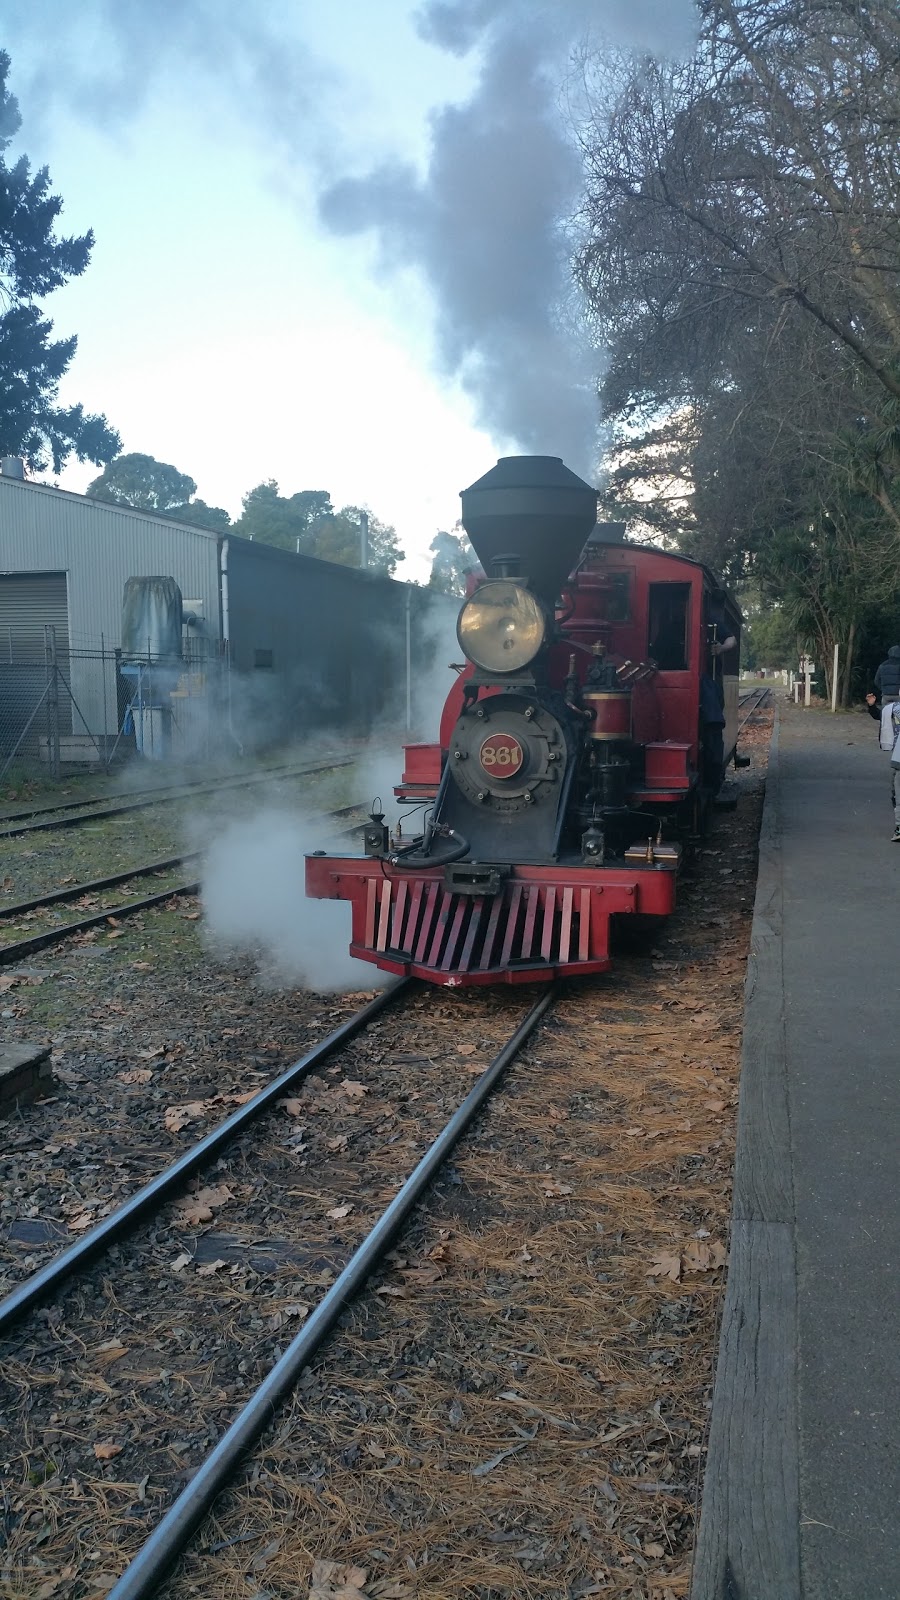 Puffing Billy Park and Playground | 13 Kilvington Dr, Emerald VIC 3782, Australia | Phone: 97570721